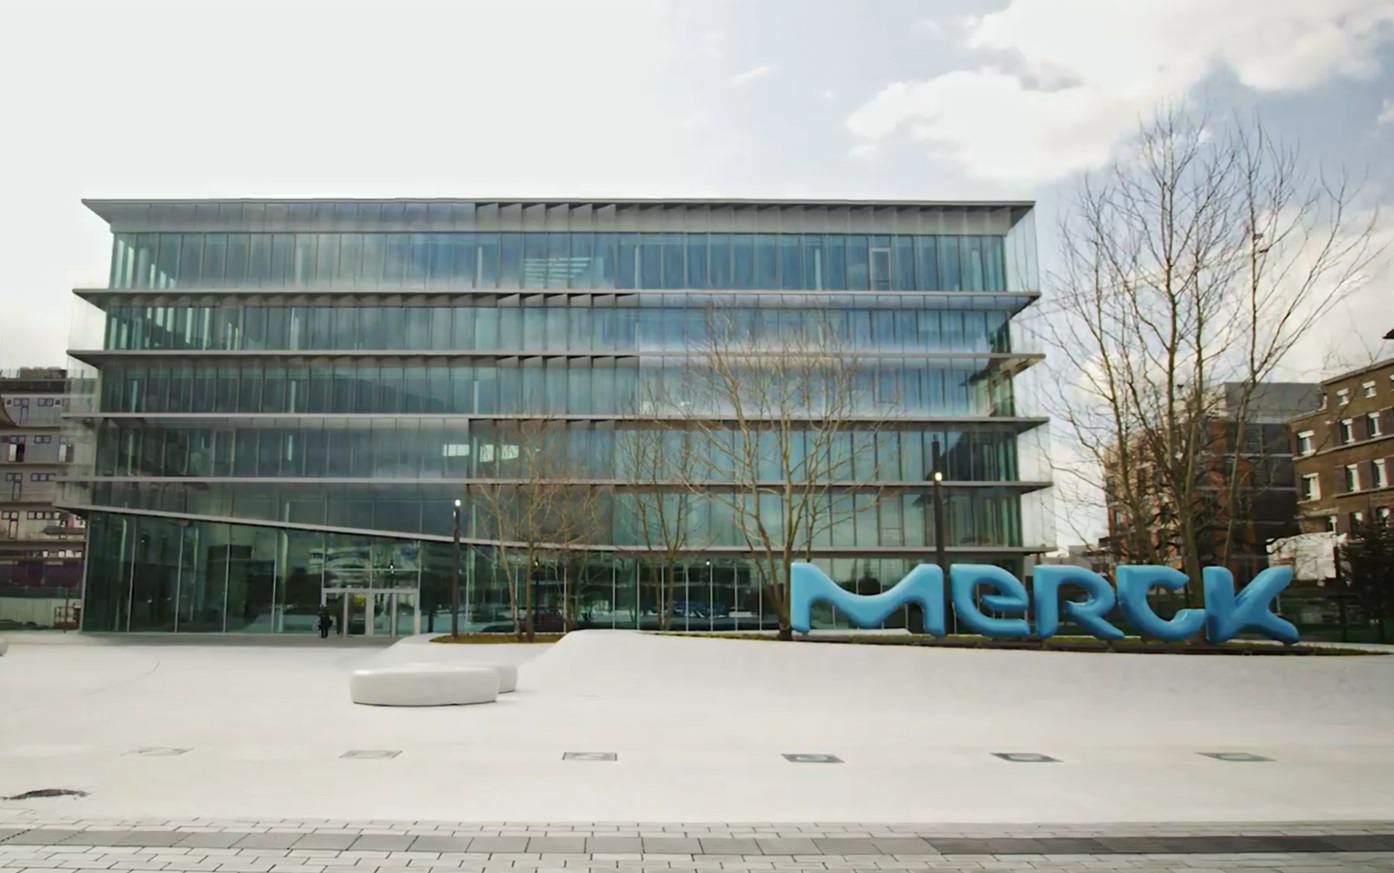 Merck to Purchase Renewable Energy for 100% of Electricity Use in Europe from 2025